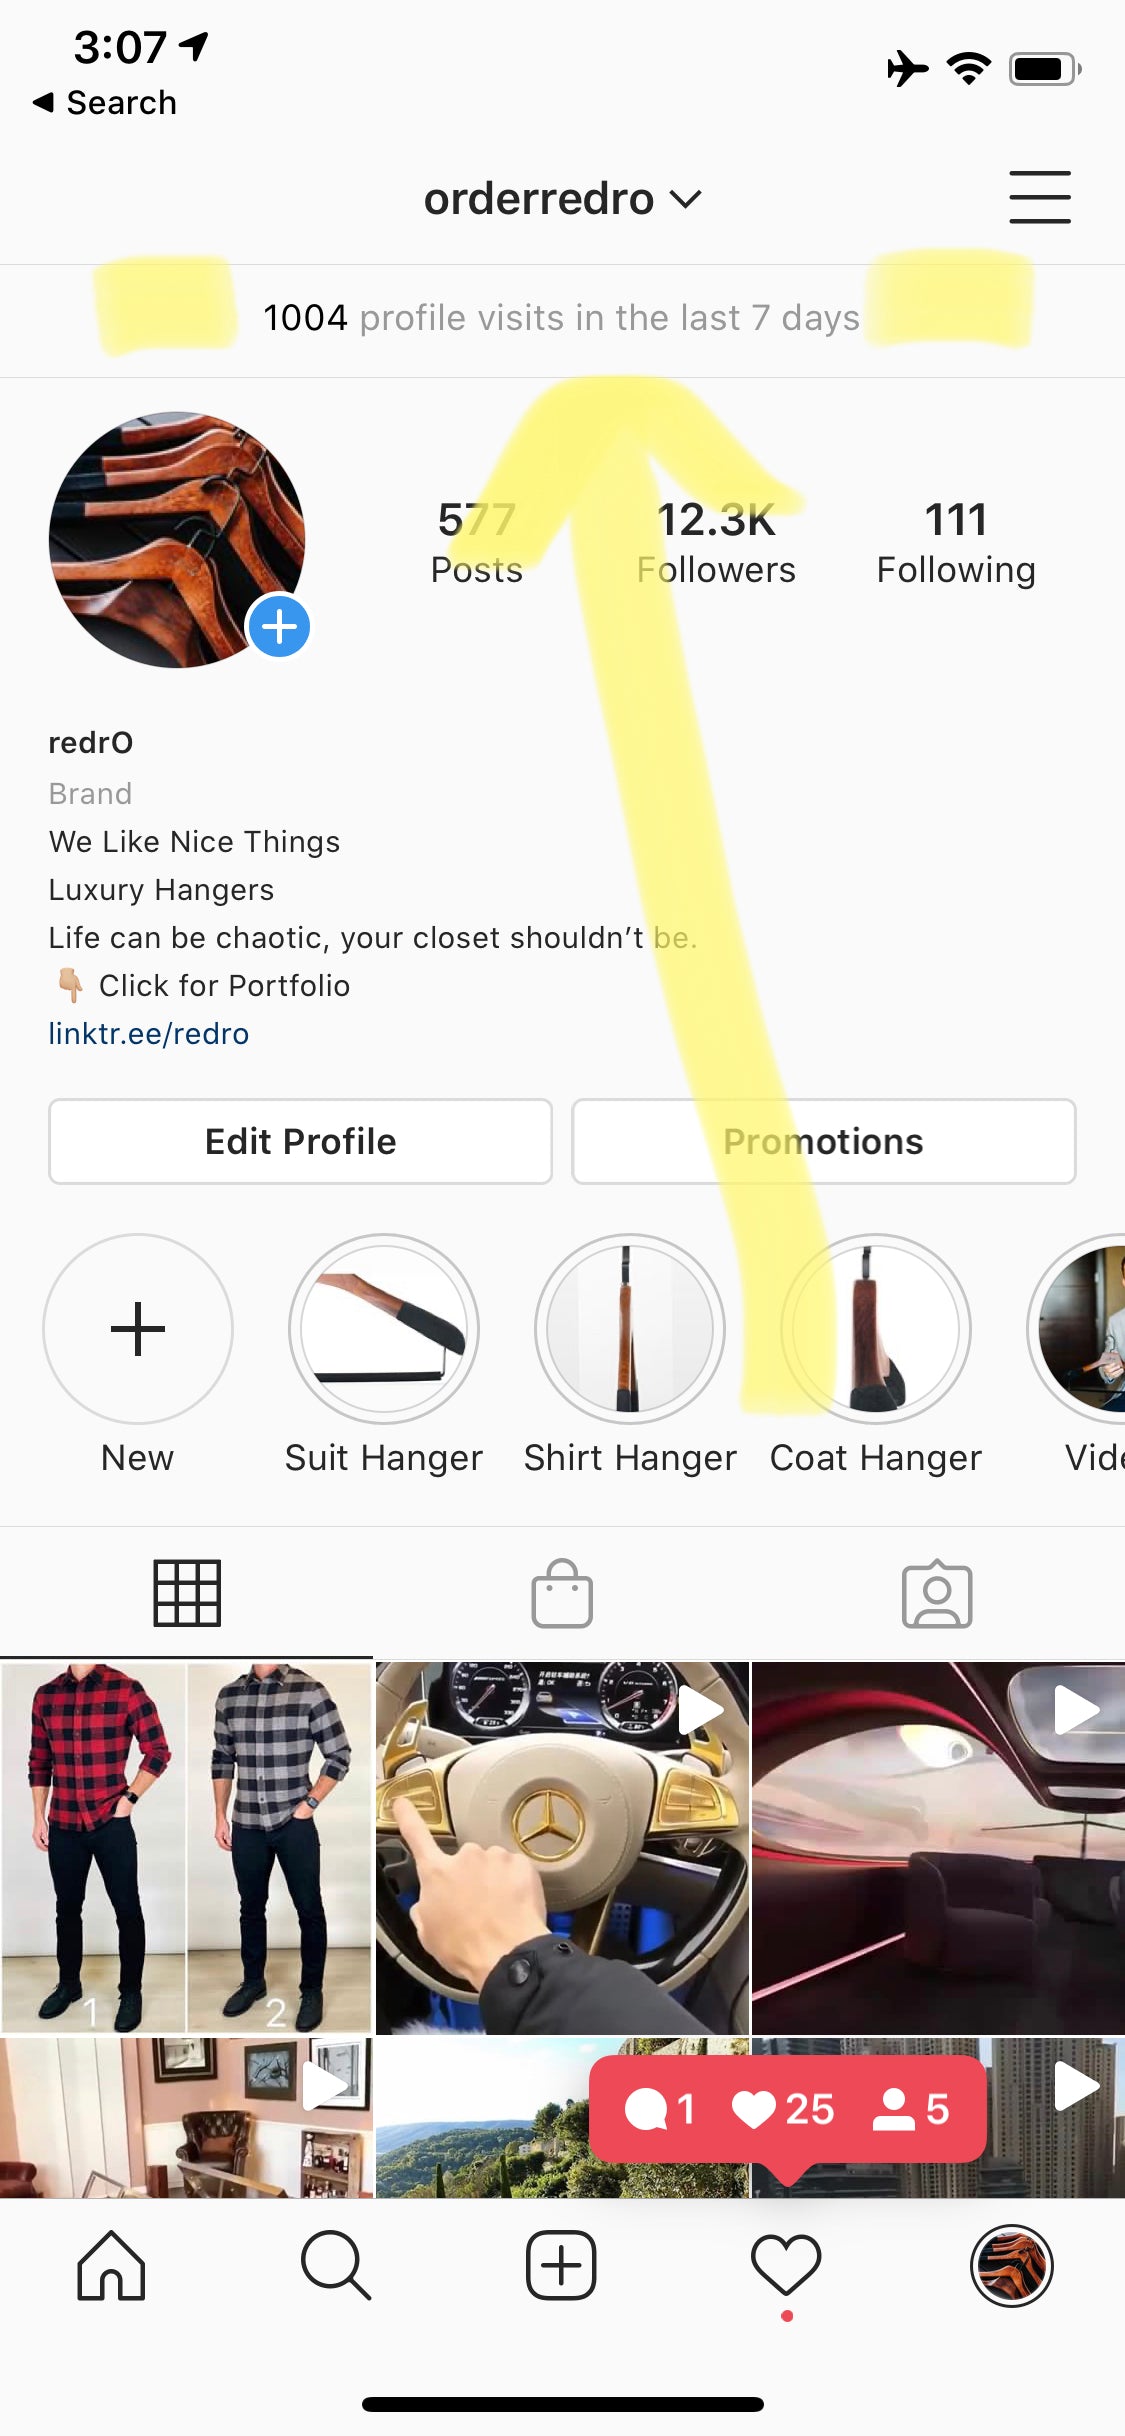 redro IG business page highlight